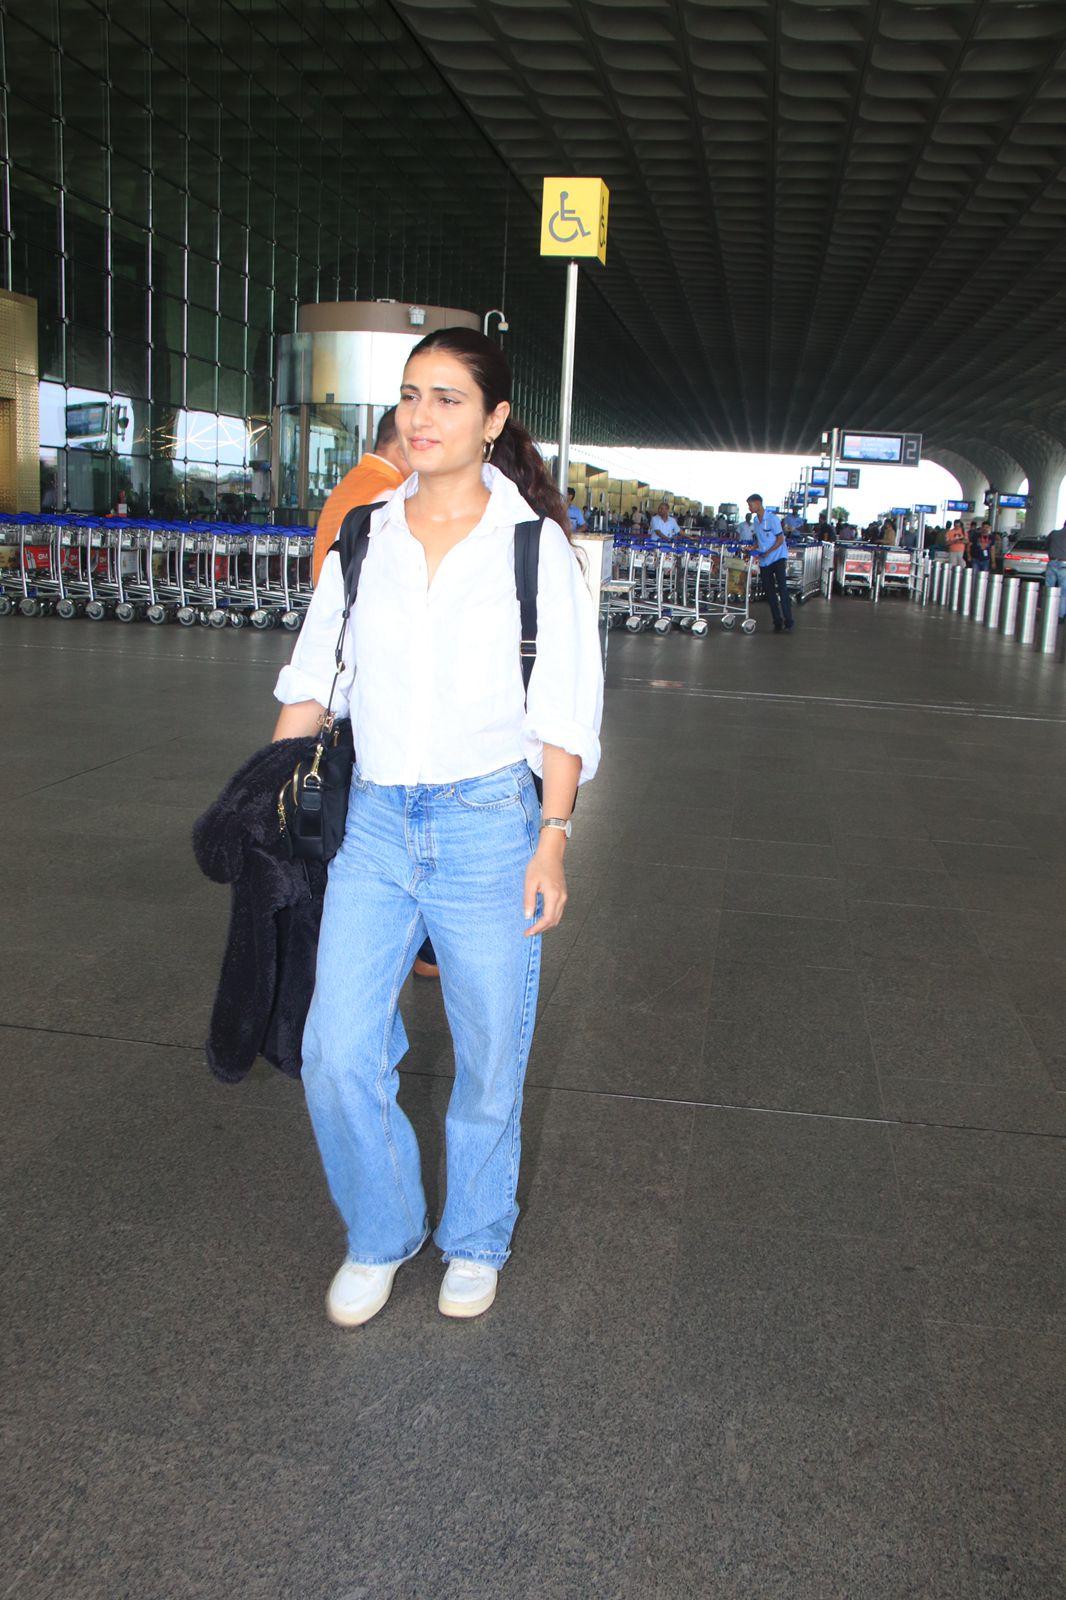 Fatima Sana Shaikh looked uber at the airport in this casual outfit